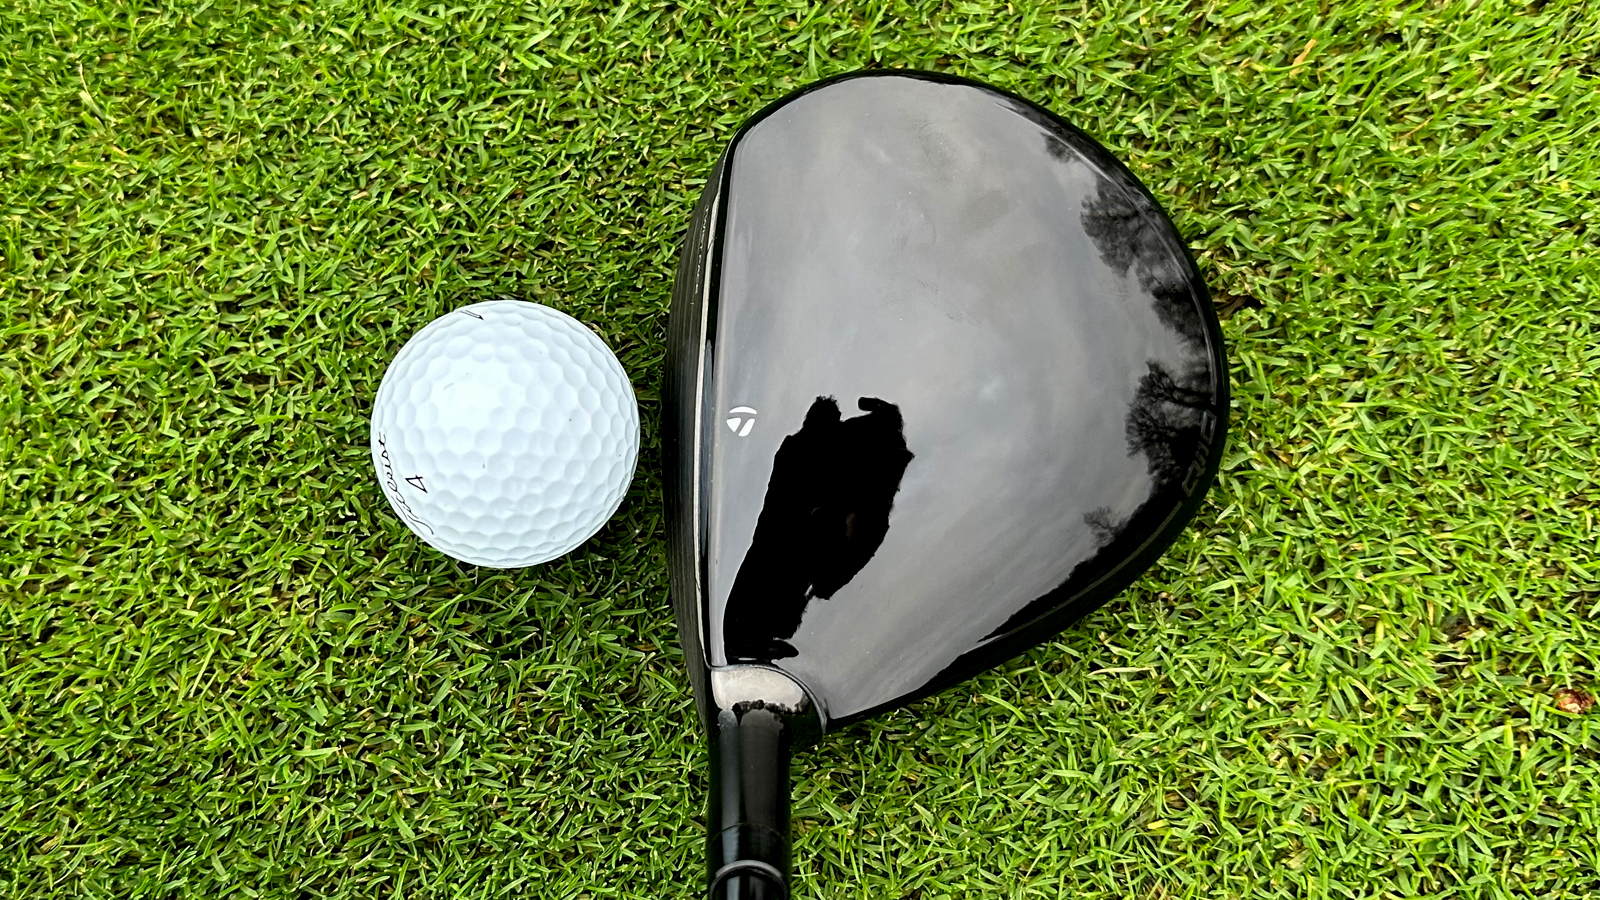 TaylorMade Qi10 Fairway Wood Review